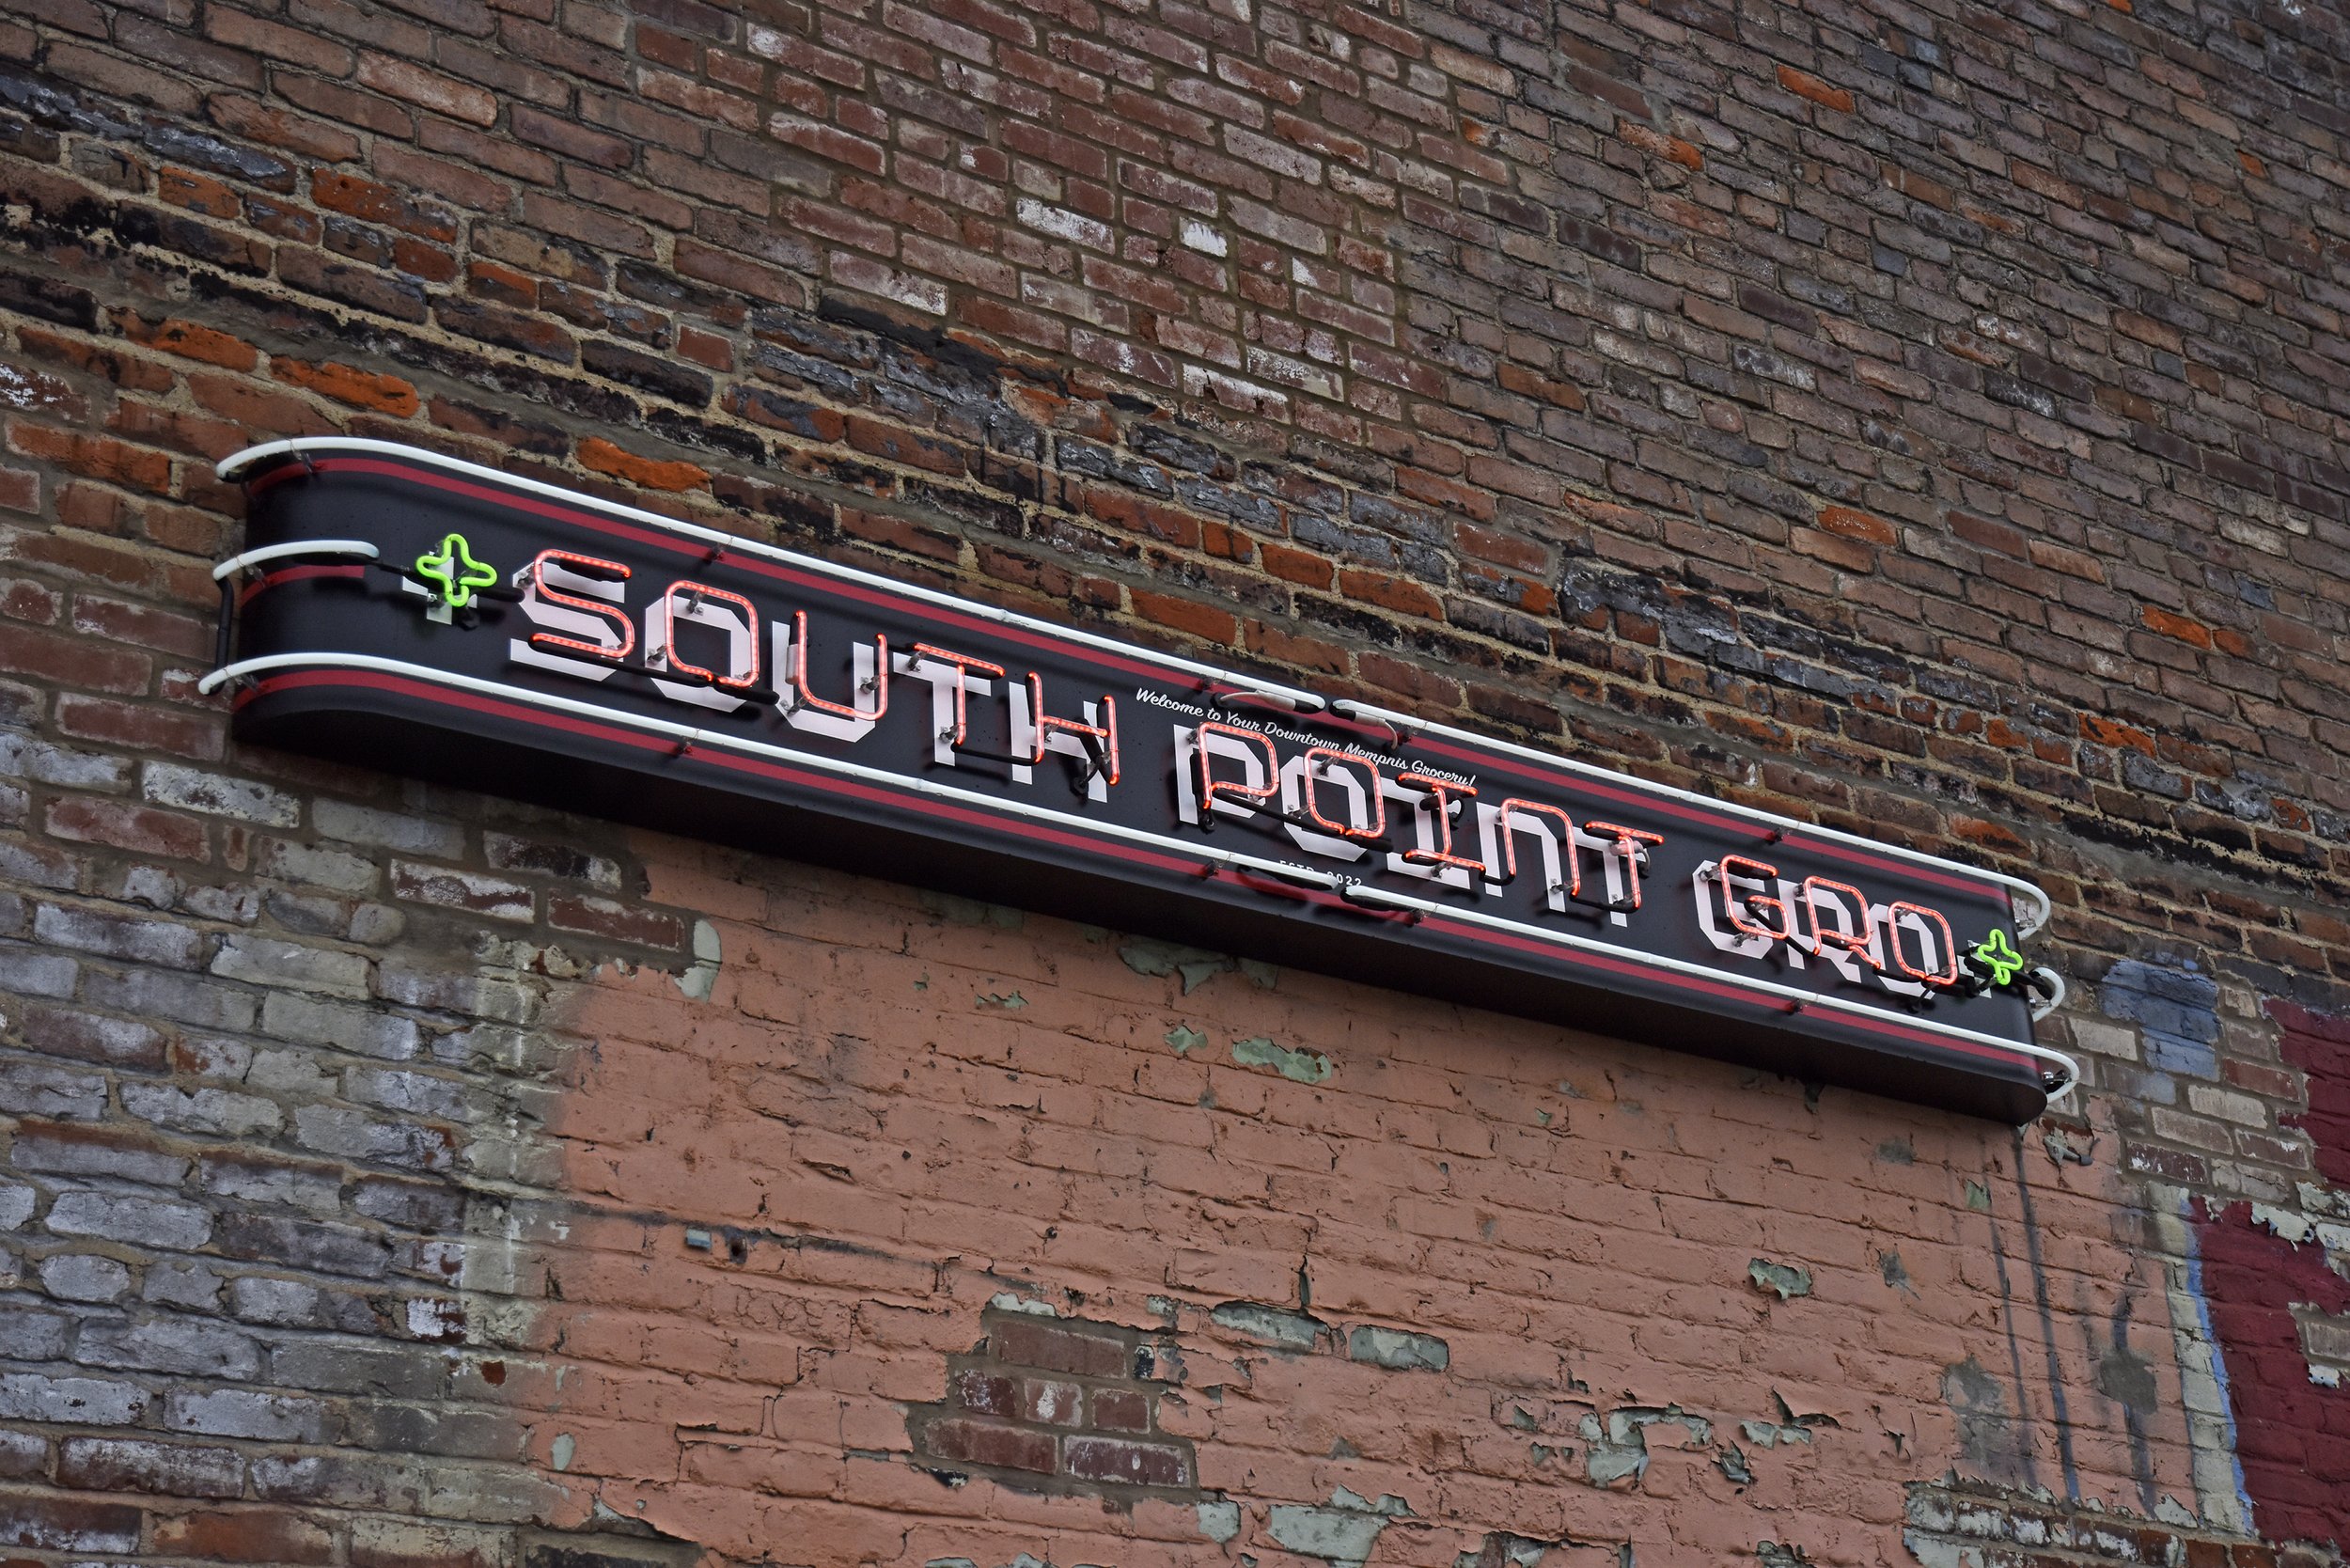  South Point Grocery  Downtown Memphis  “South Point Gro” east entrance neon sign  Branding creative and design by Chuck Mitchell  Sign fabrication and installation by Frank Balton Sign Company 